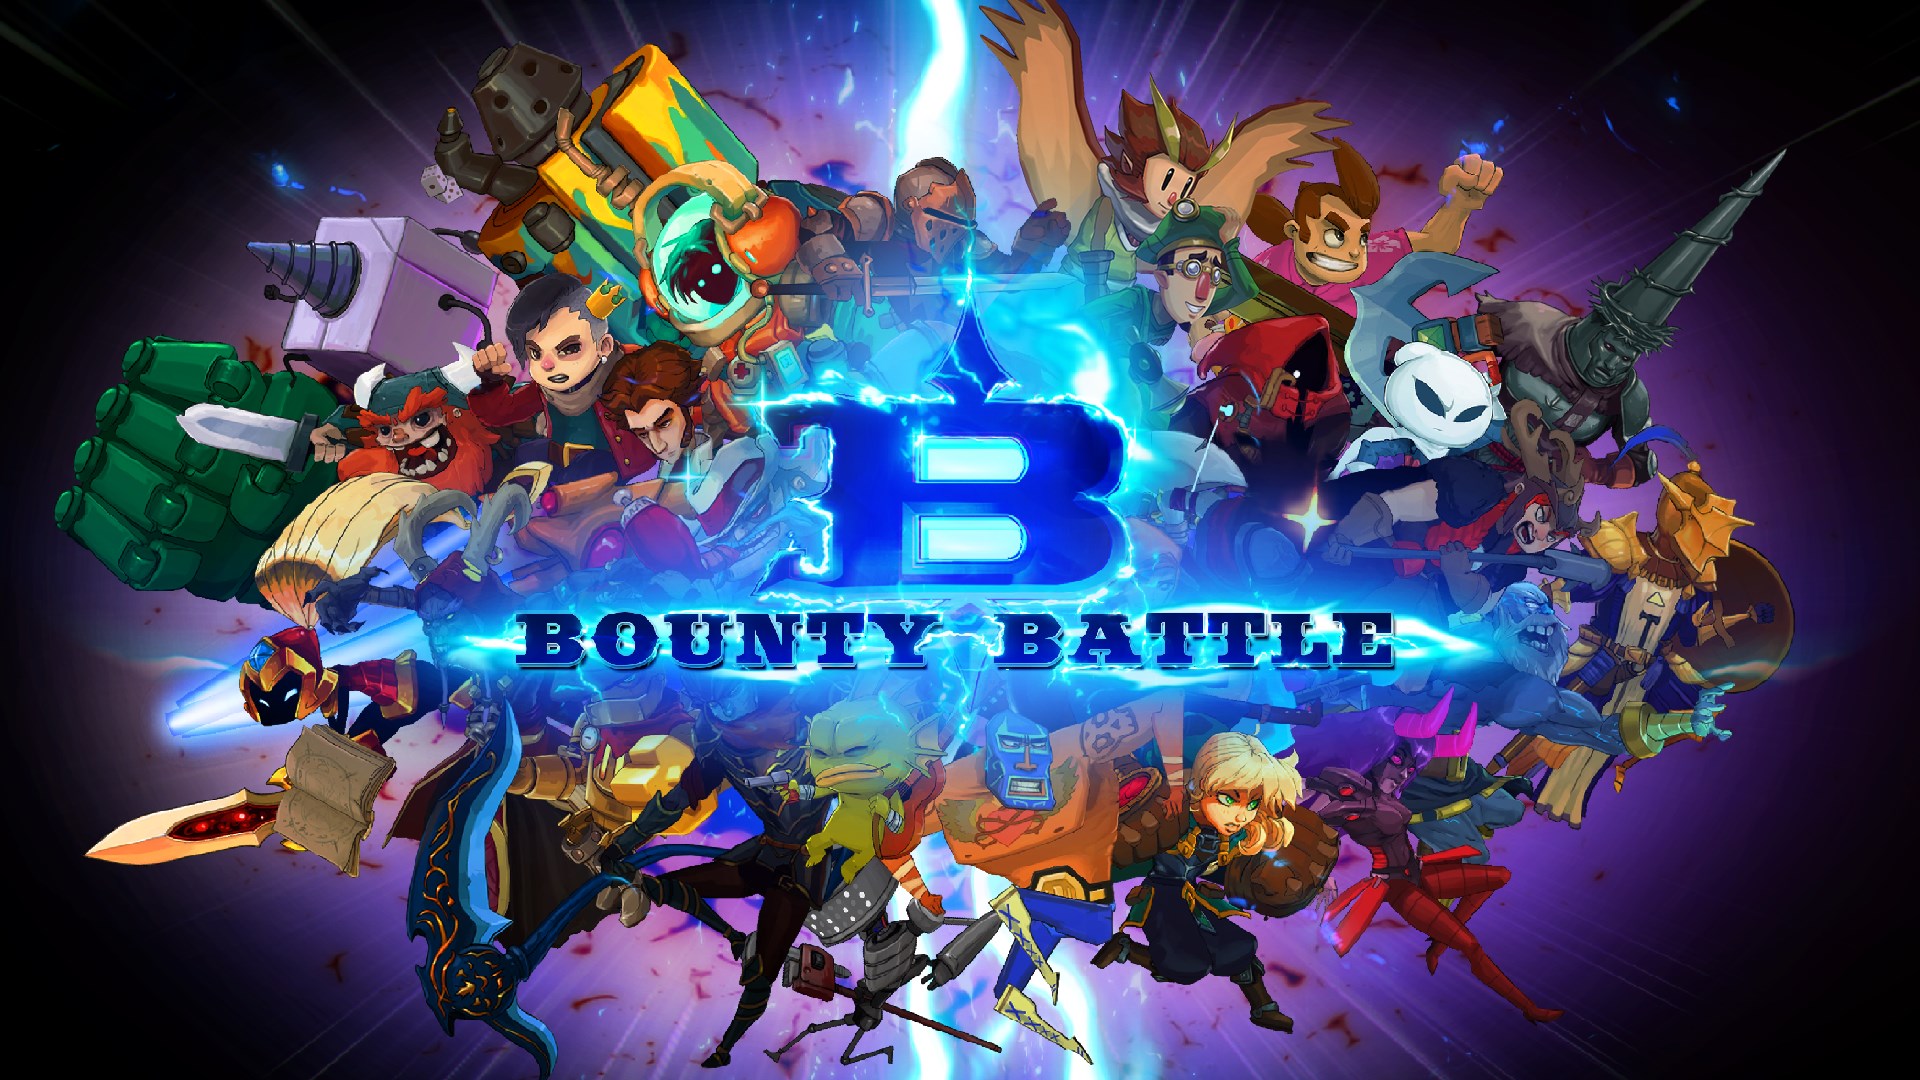 Video For Bounty Battle Is Now Available For Digital Pre-order And Pre-download On Xbox One